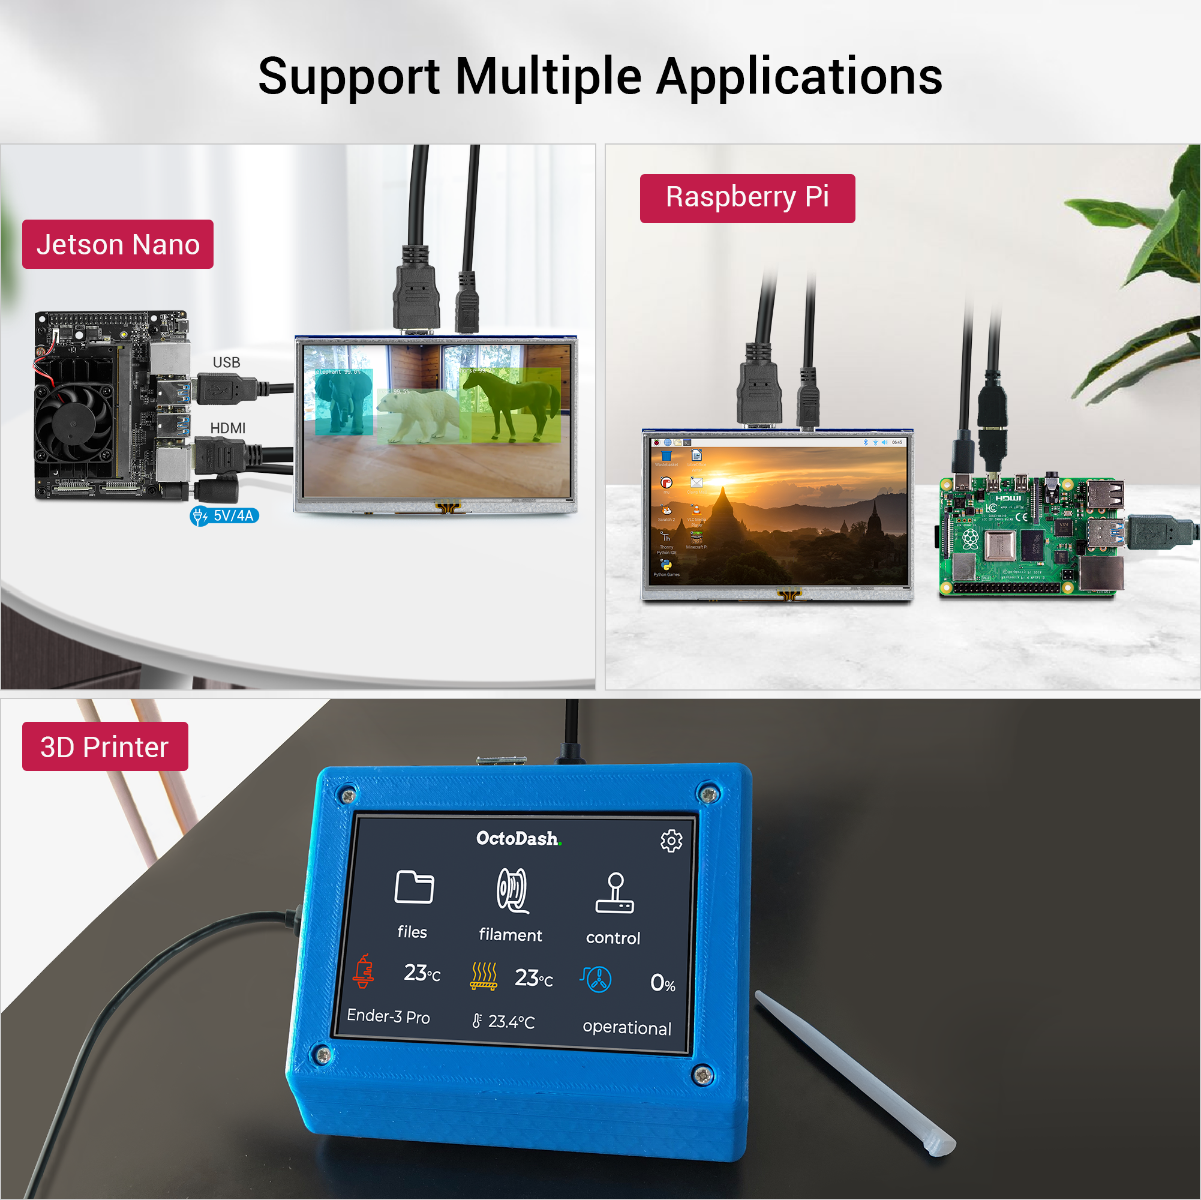 HDMI 5 inch display support multiple applications